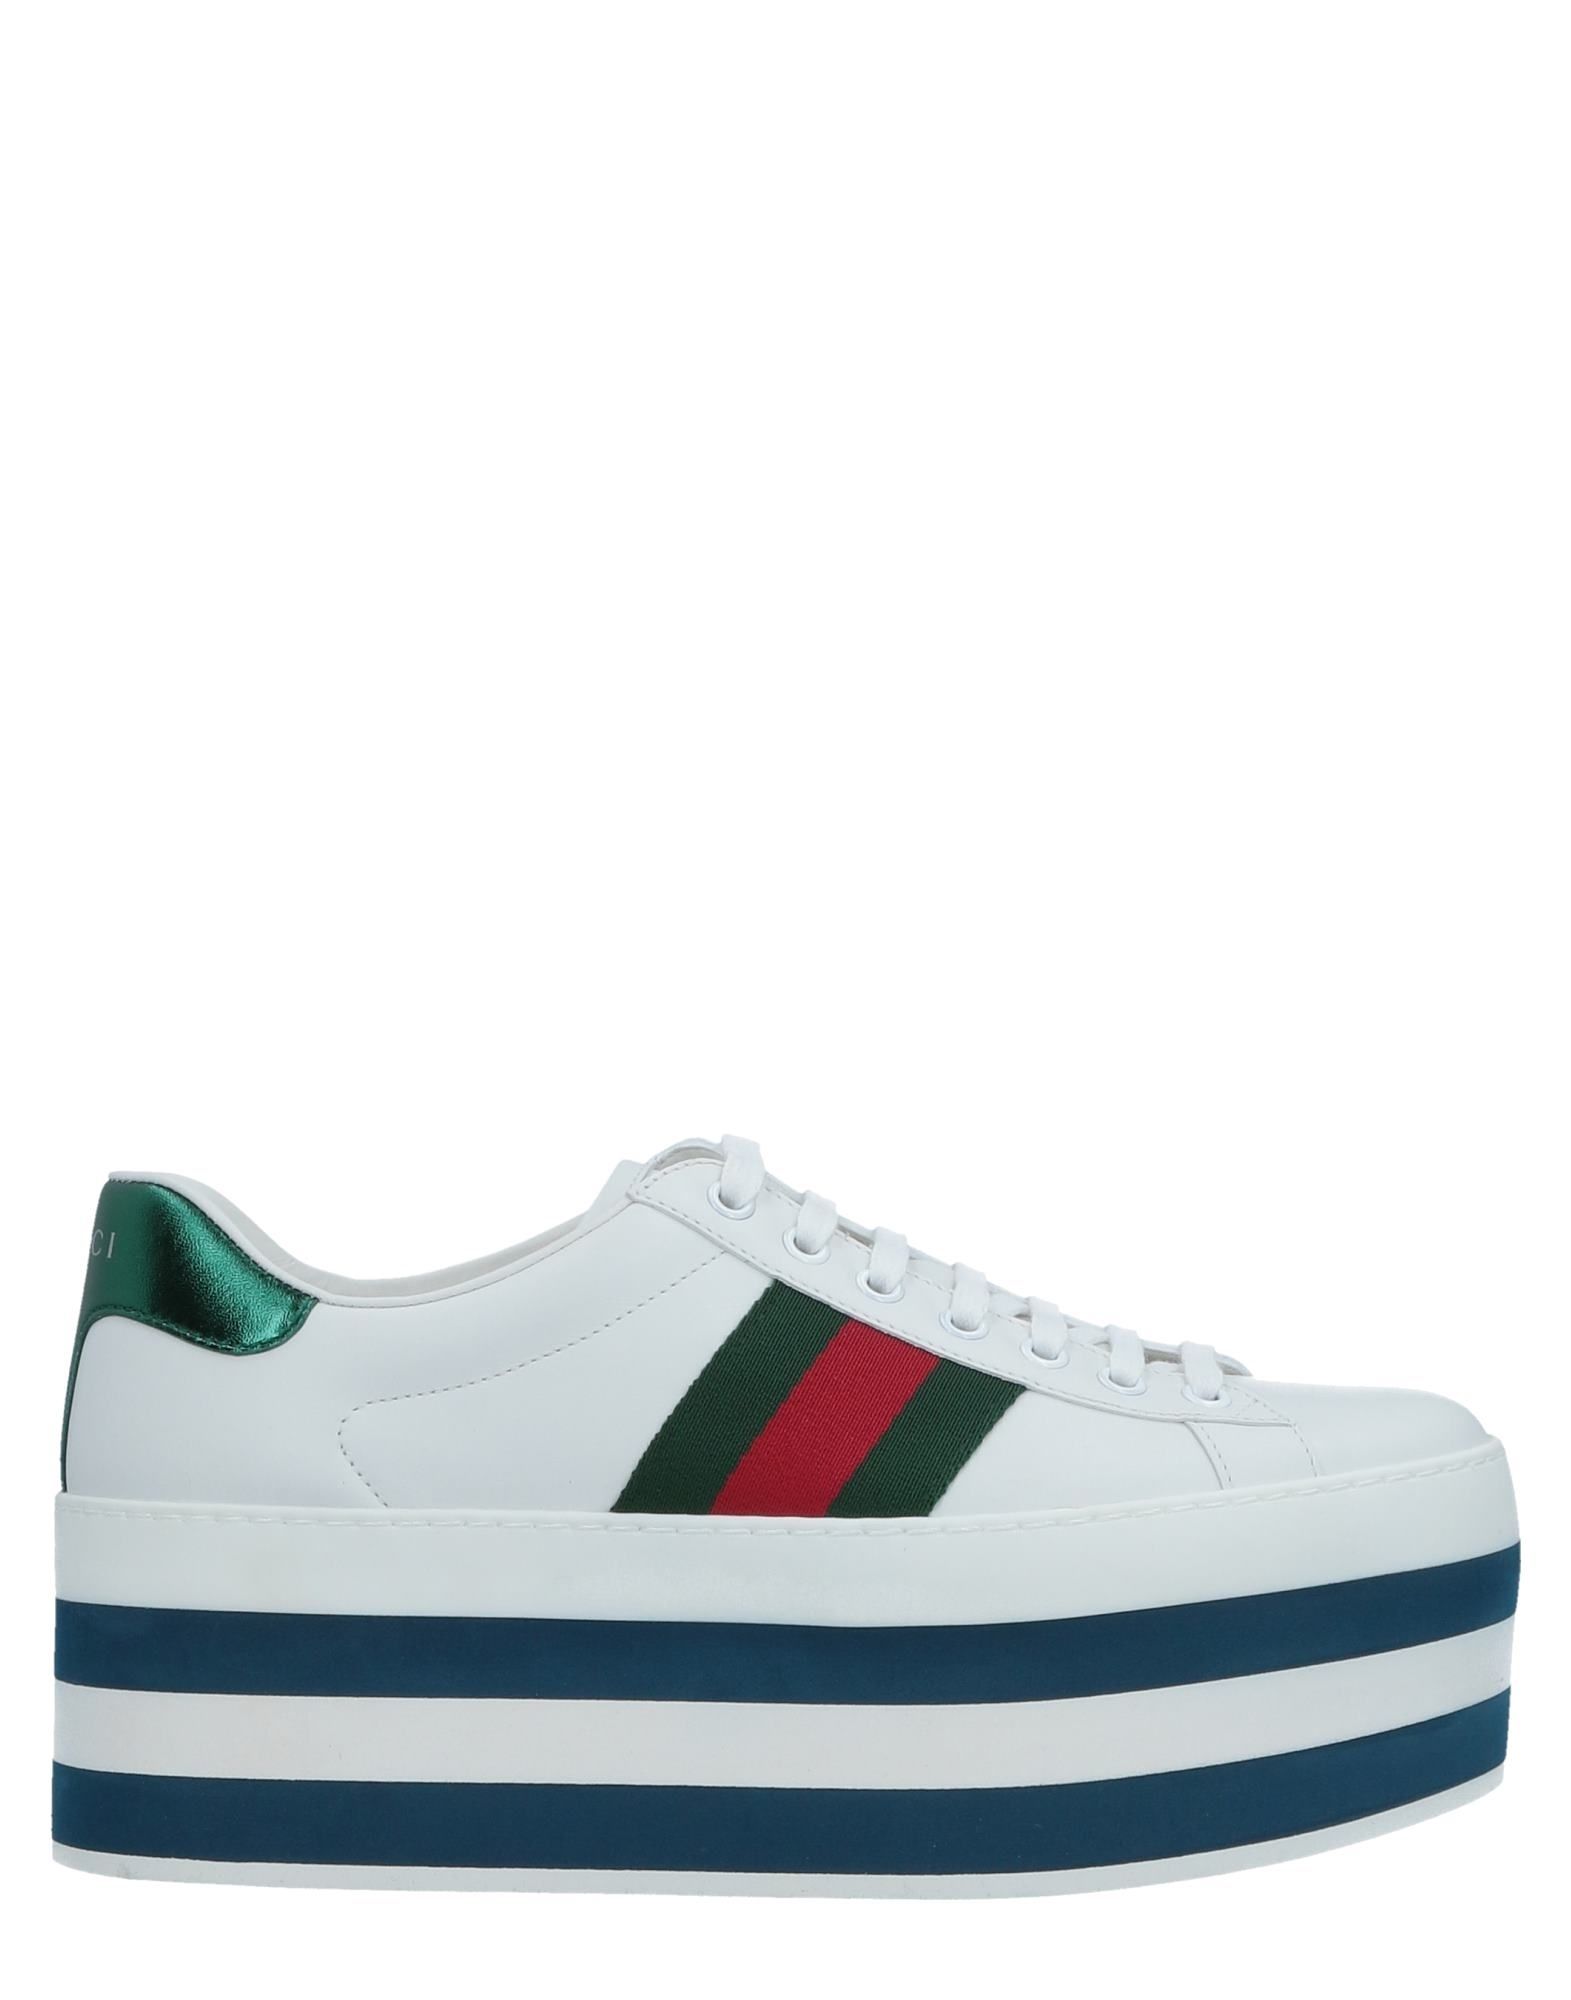 GUCCI Trainers,11515943SP 11